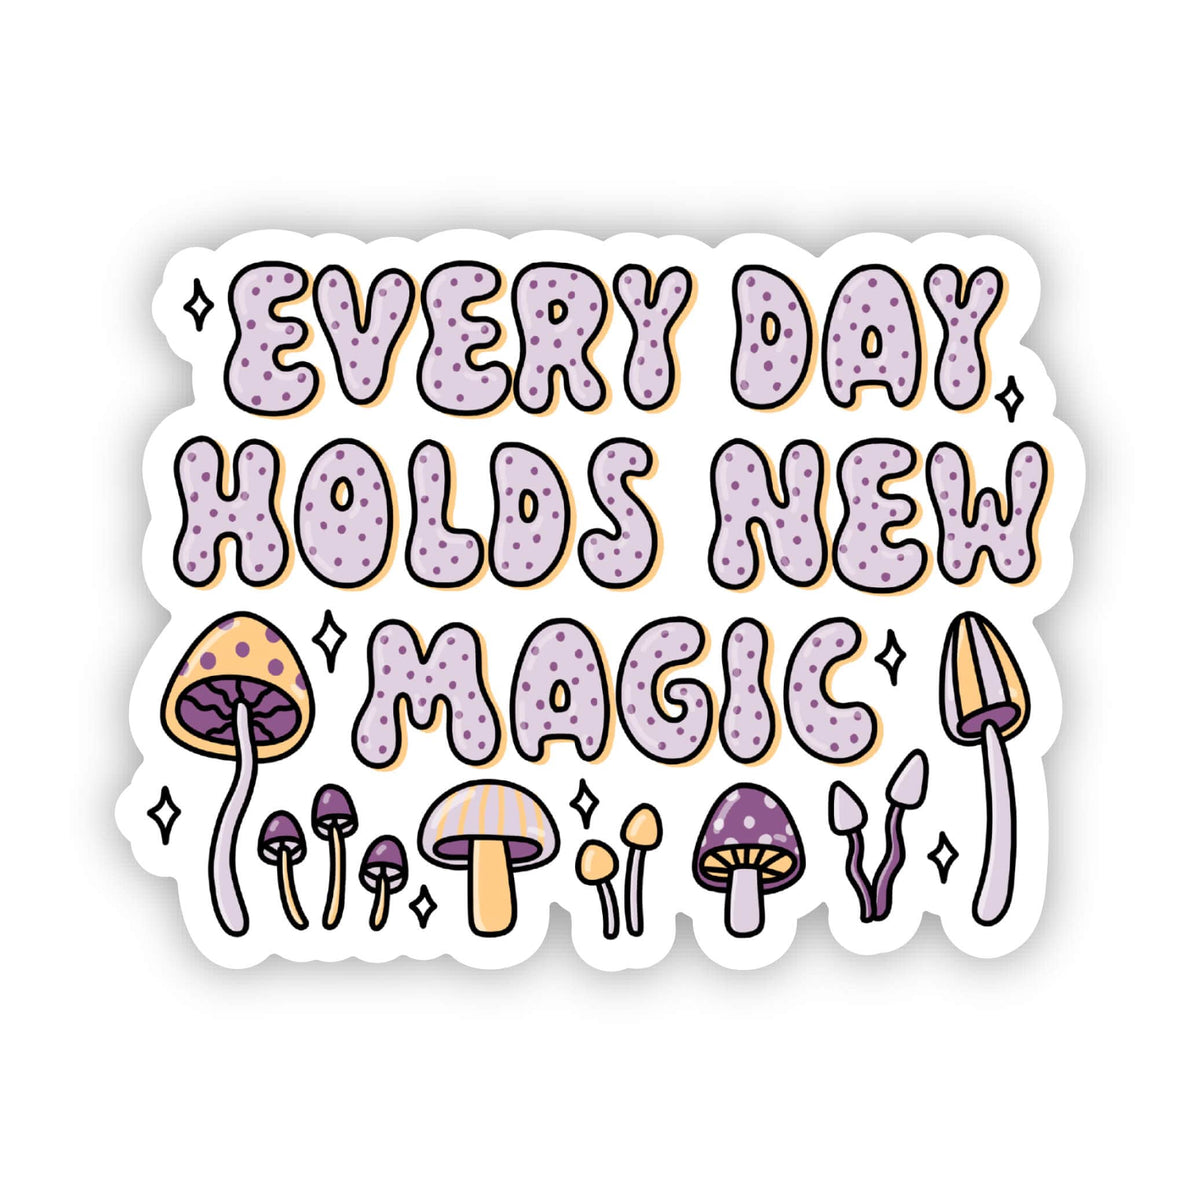 Every day holds new magic sticker